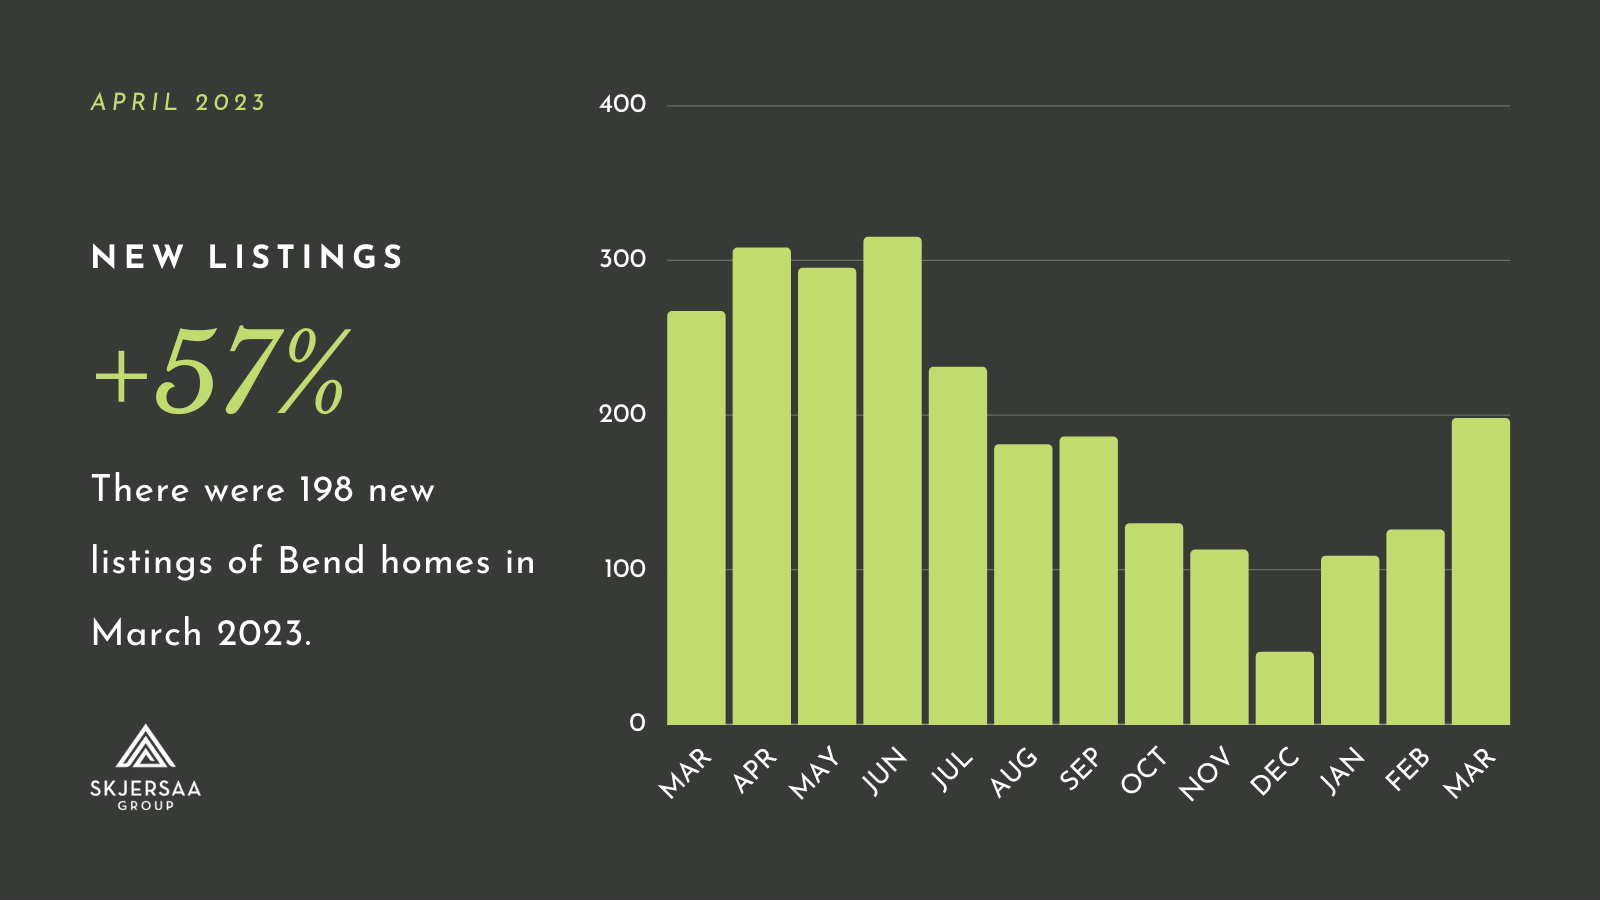 Bar graph showing the trend of increased new listings of homes for sale in Bend since December 2022.